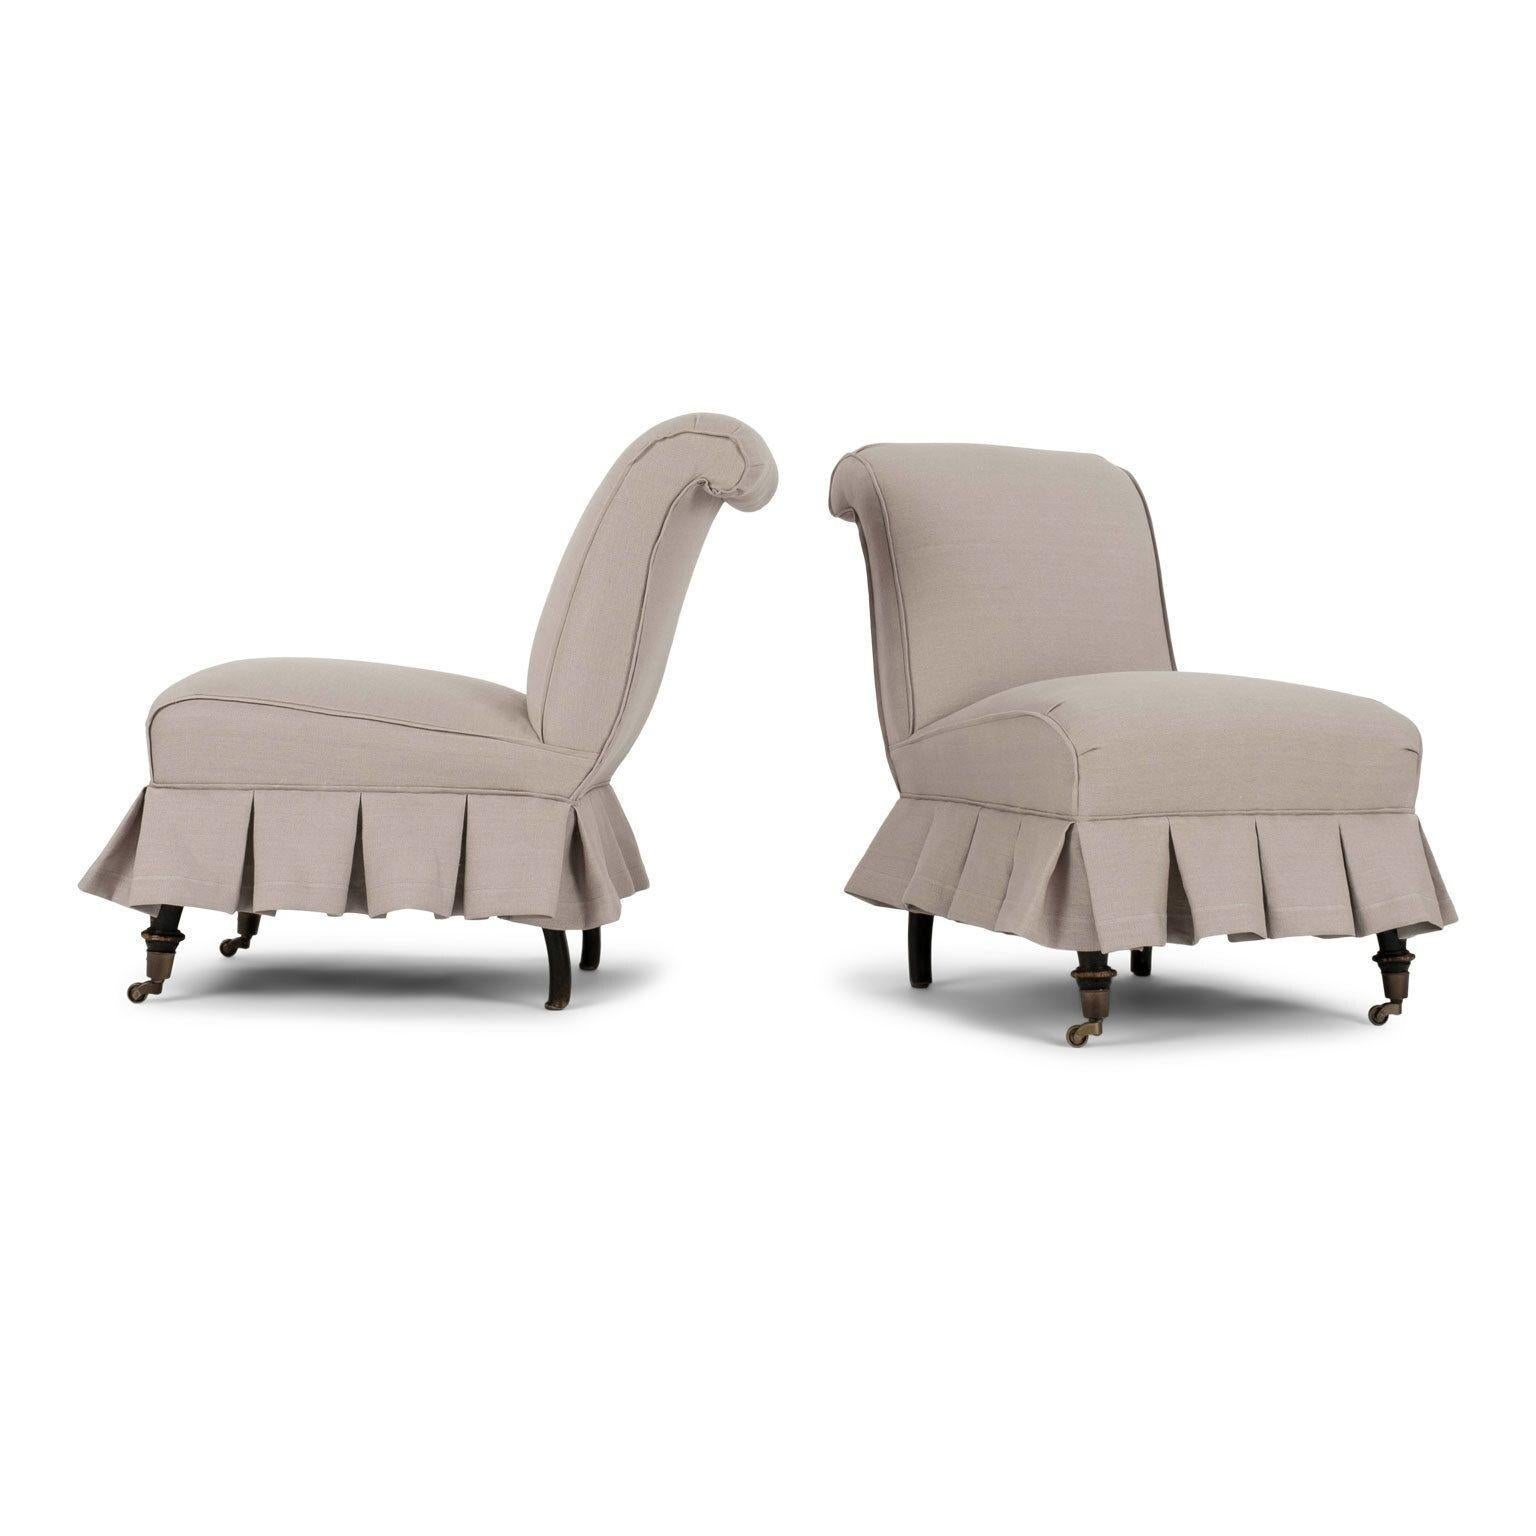 Hand-Carved Pair of French Napoleon III Slipper Chairs in Lavender Linen